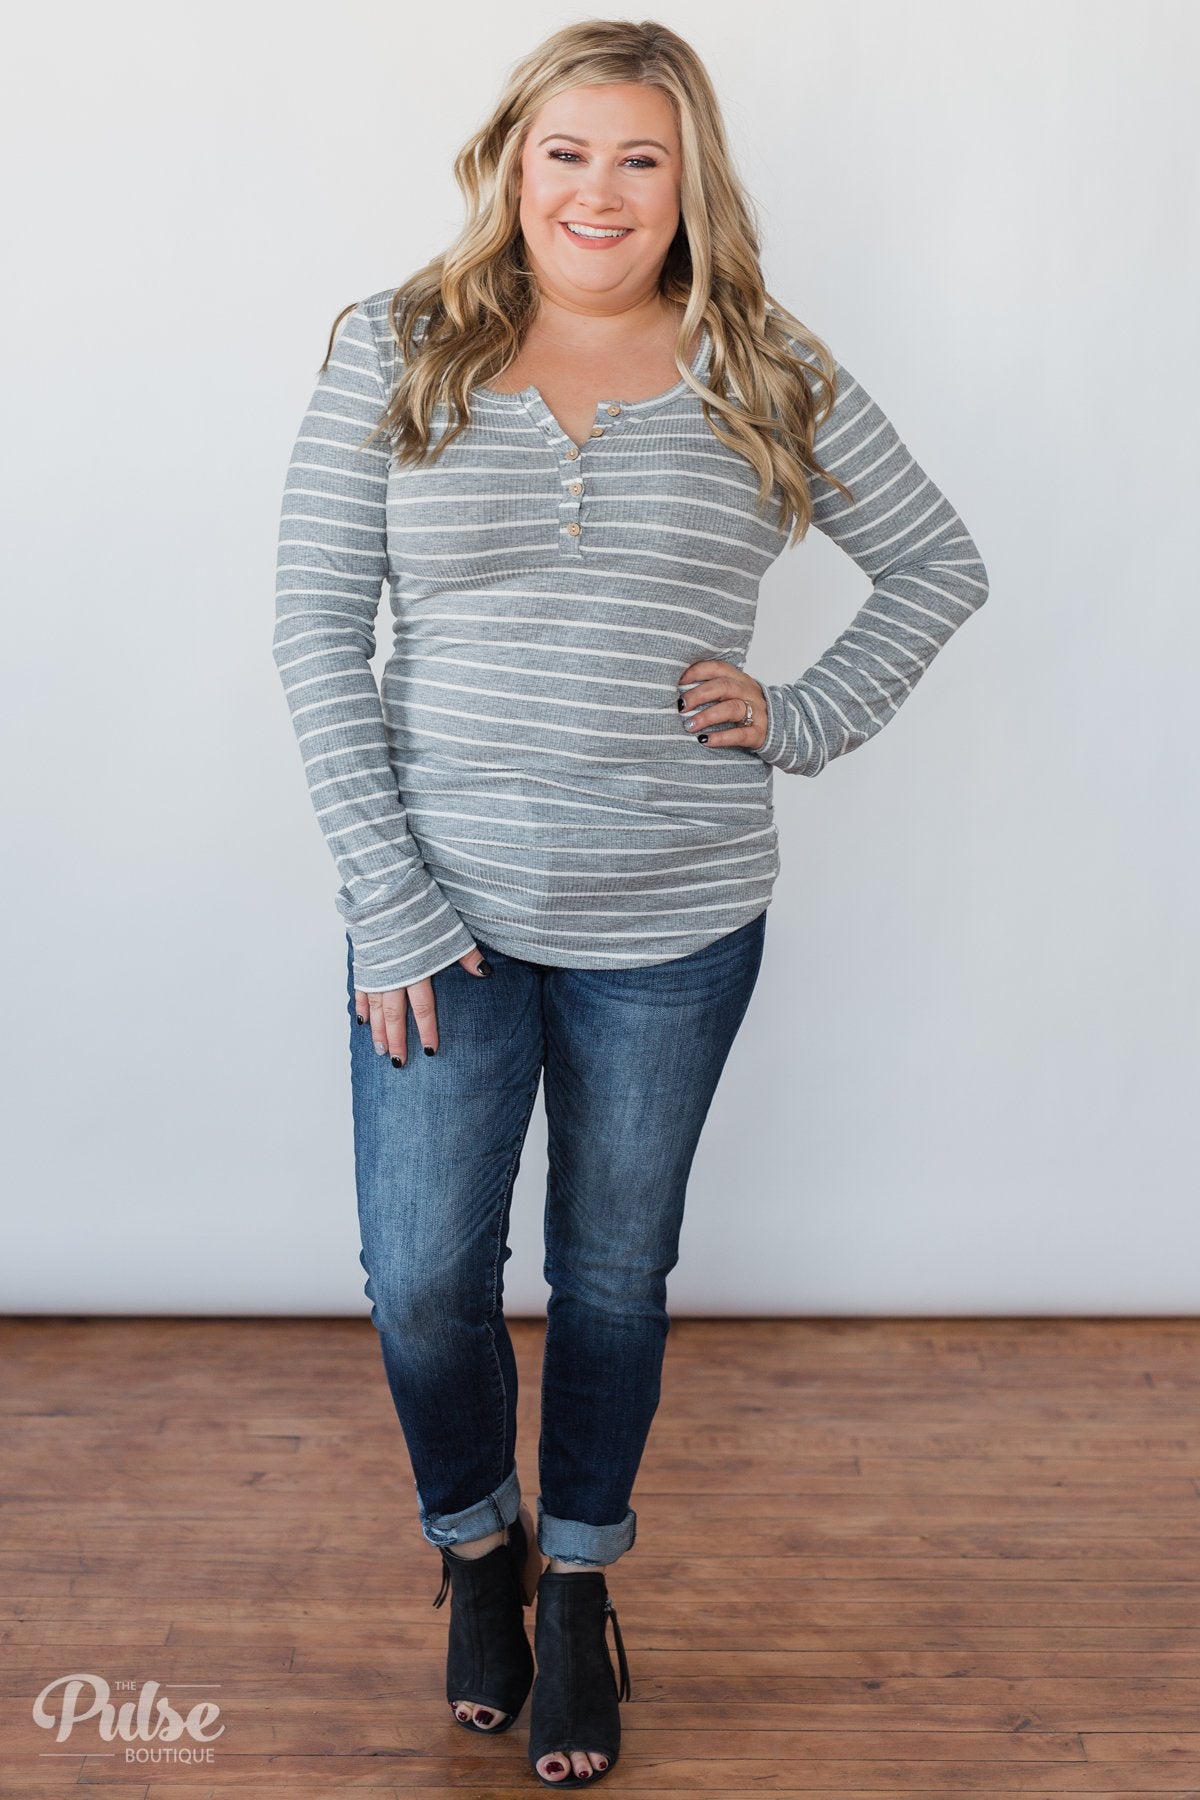 Need You Now 5-Button Henley Top- Grey Striped